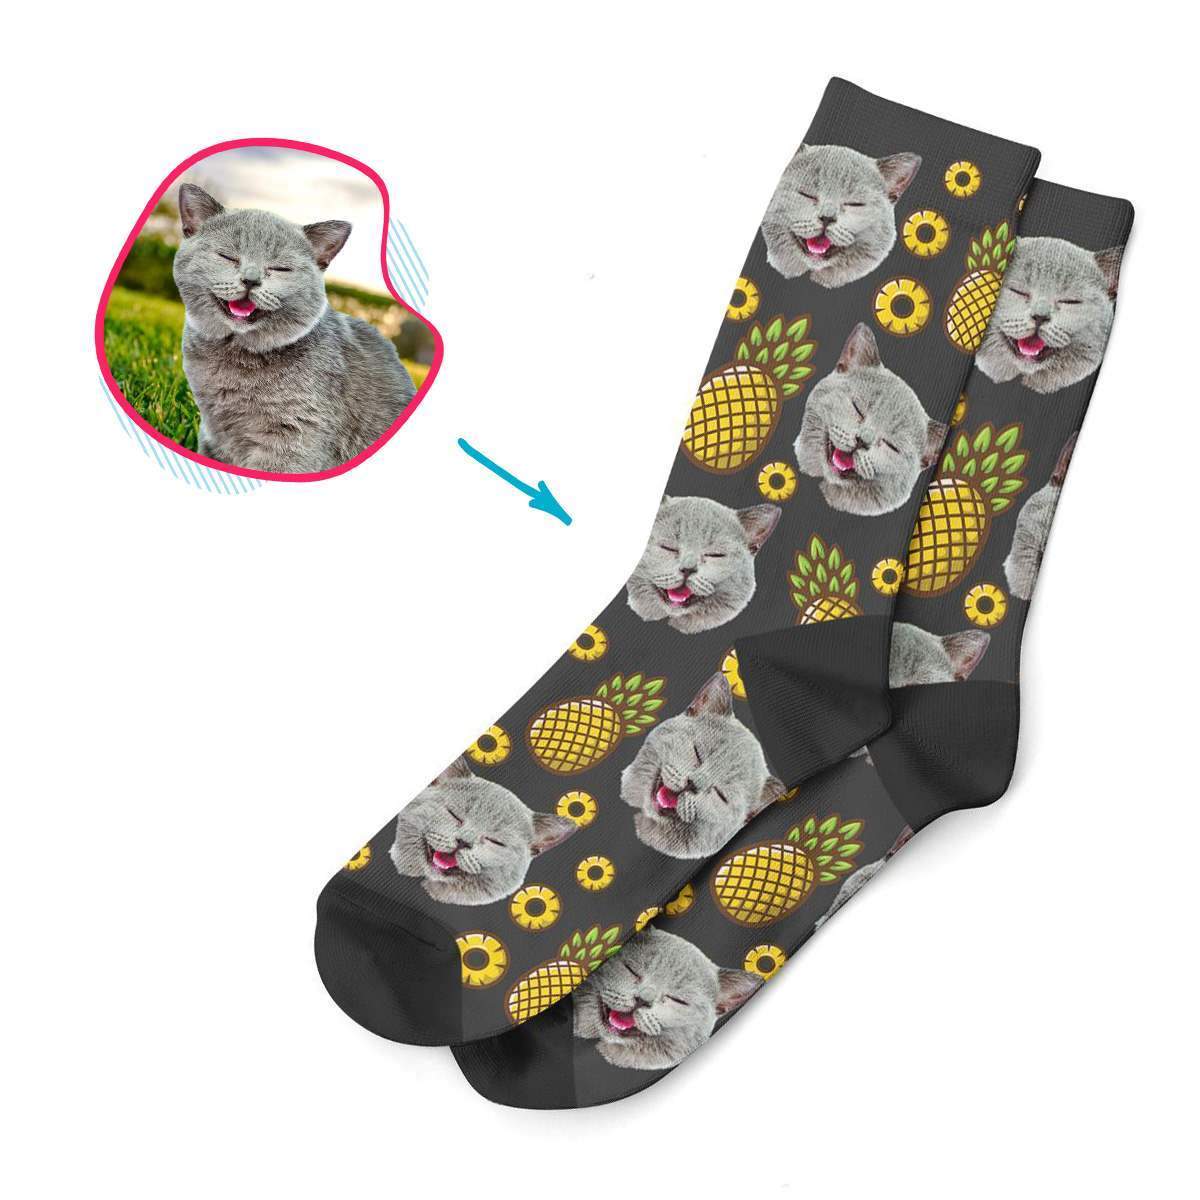 dark Fruits socks personalized with photo of face printed on them